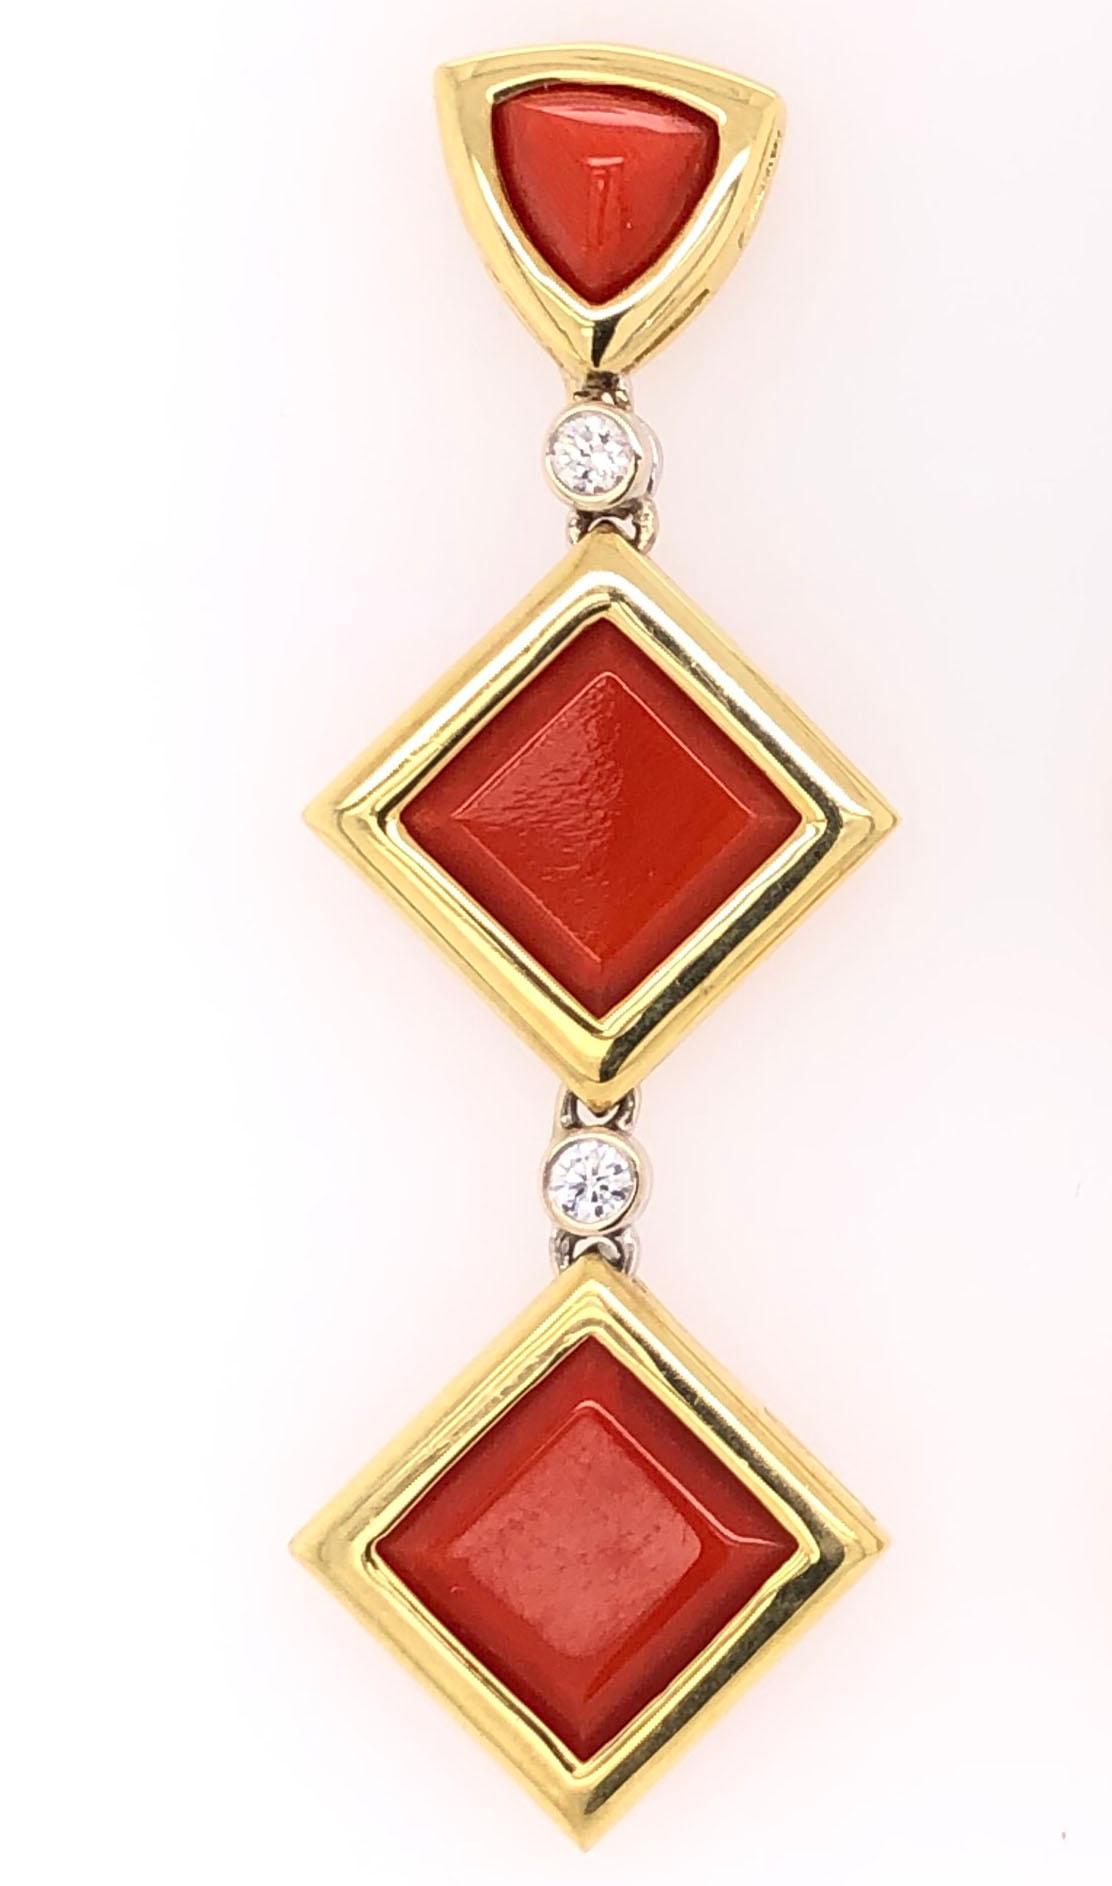 Simply Beautiful! Stylish and finely detailed Deep Red Coral and Diamond Drop Vintage Gold Earrings. Hand crafted in 18 Karat Yellow Gold and hand set with square Coral gemstones, approx. 45.00 total Carat weight and Diamonds, weighing approx. 0.24